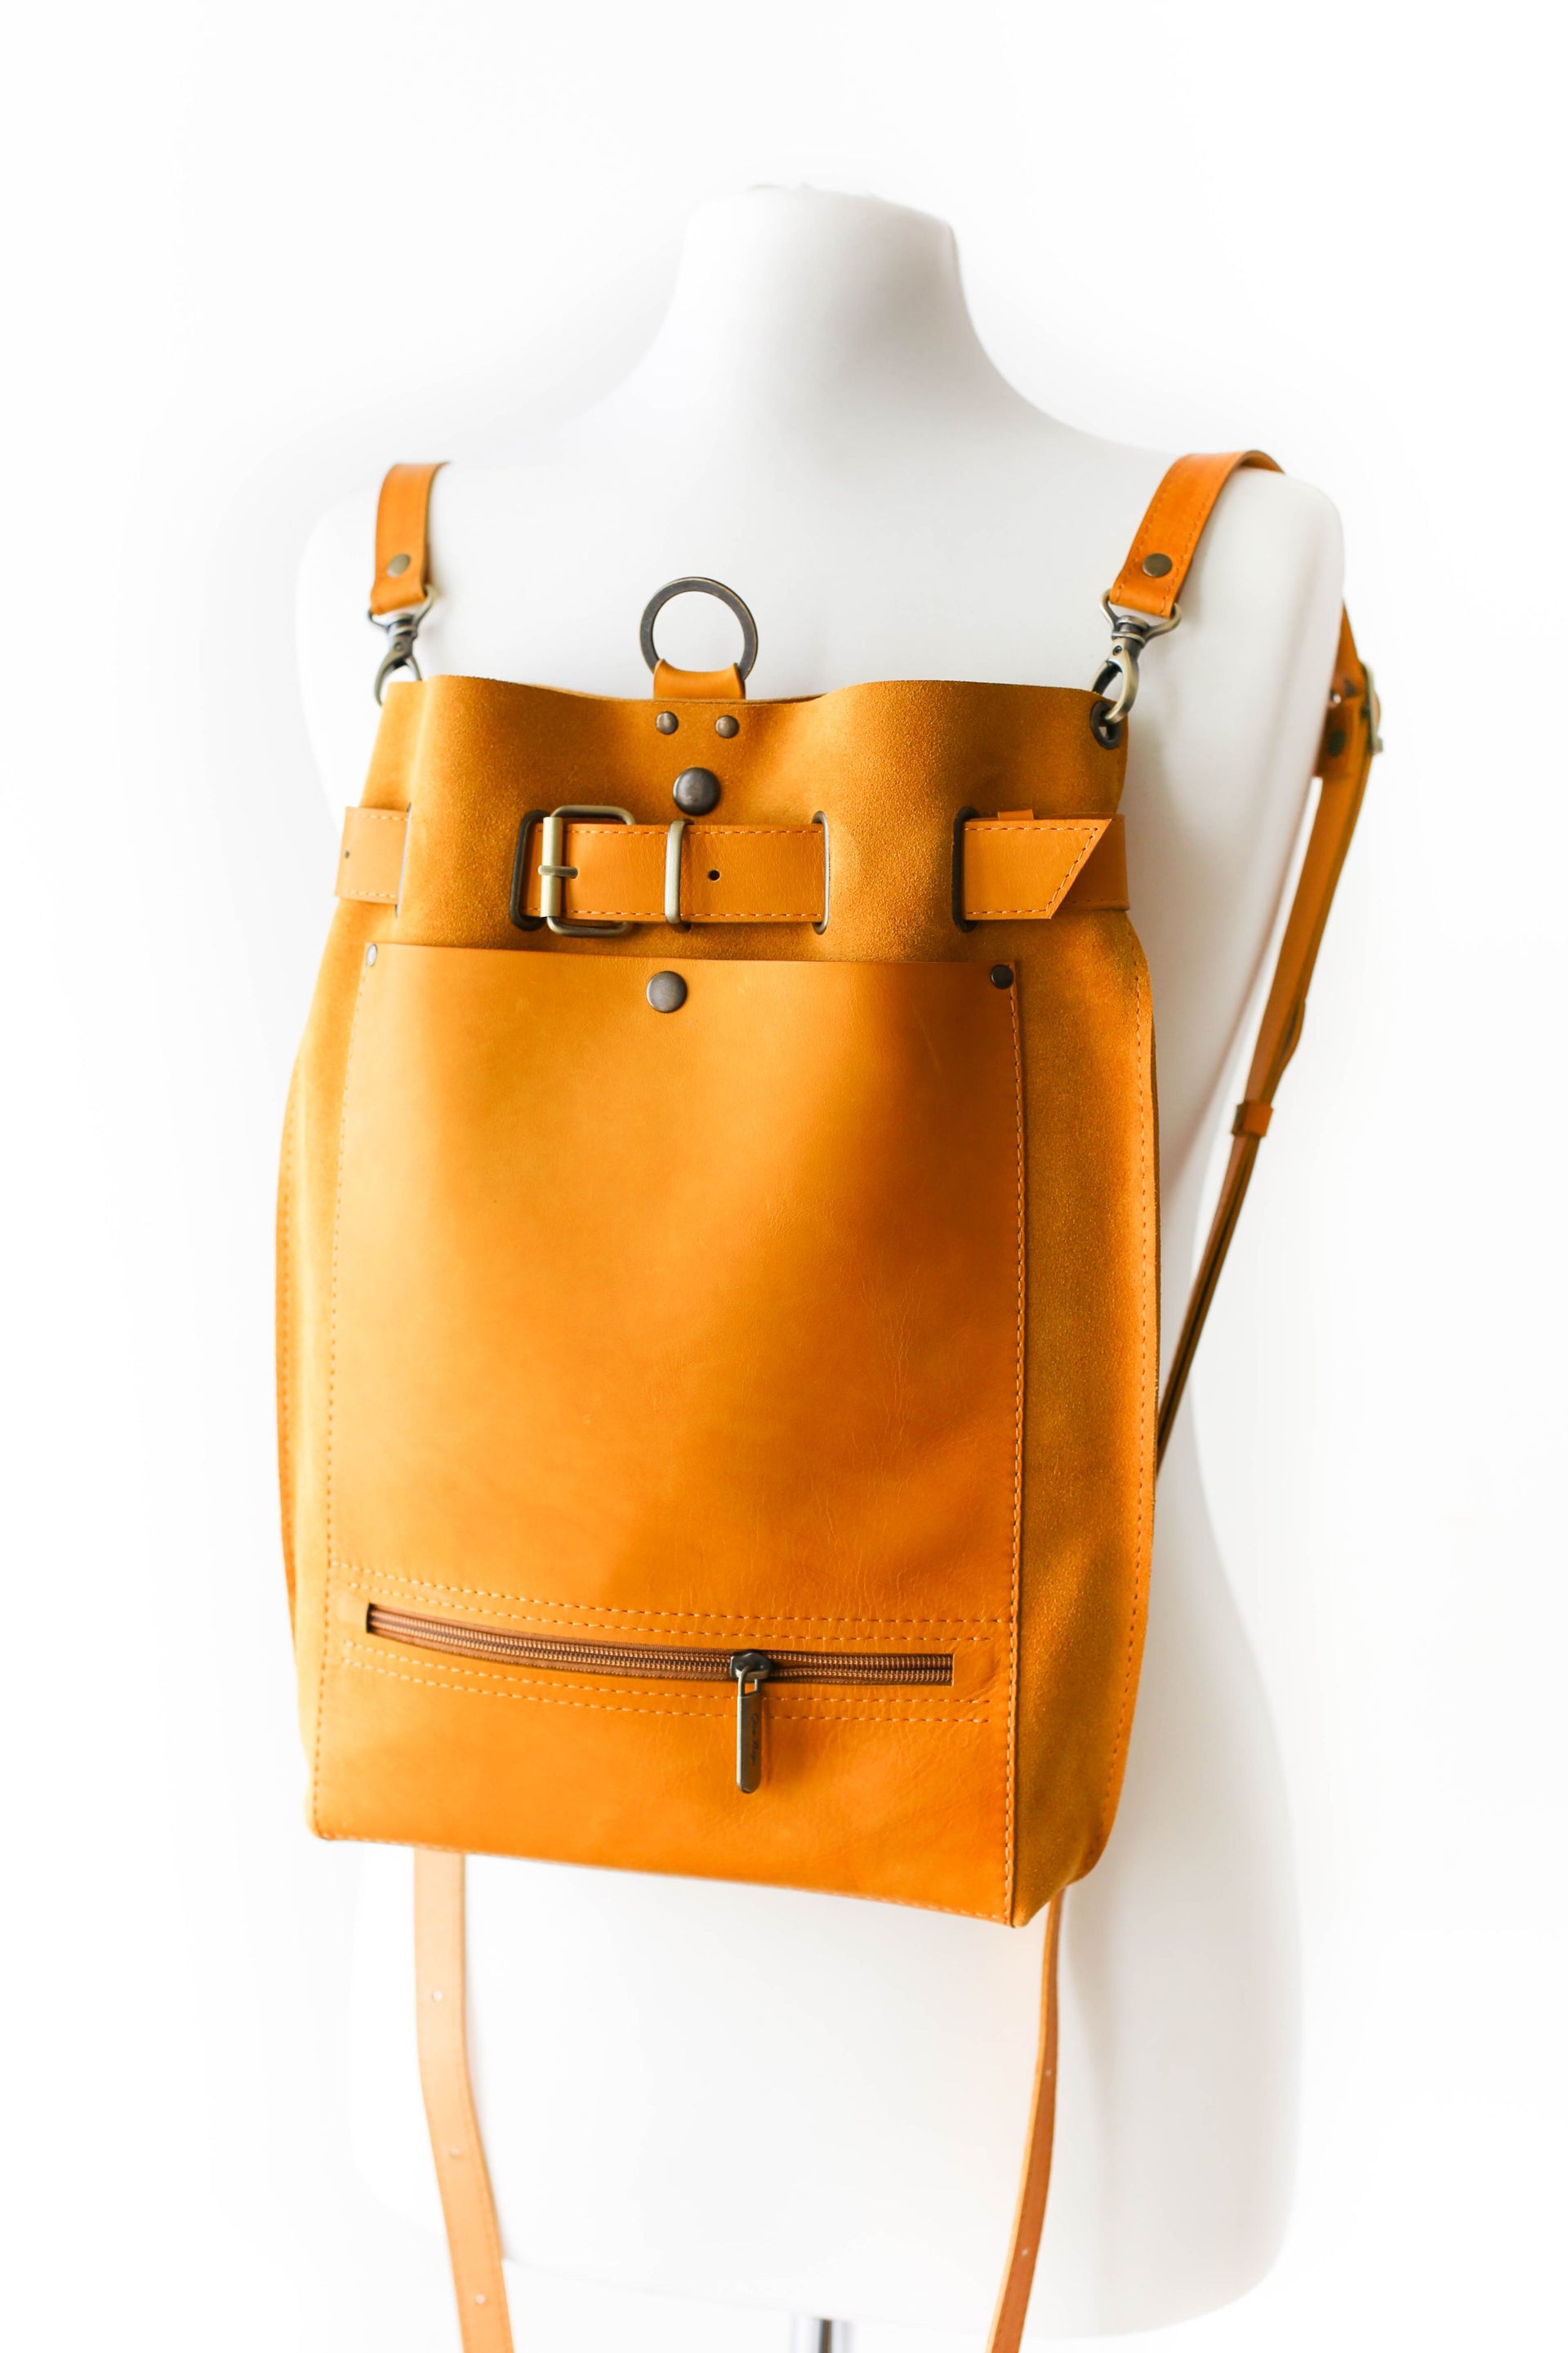 suede backpack purse